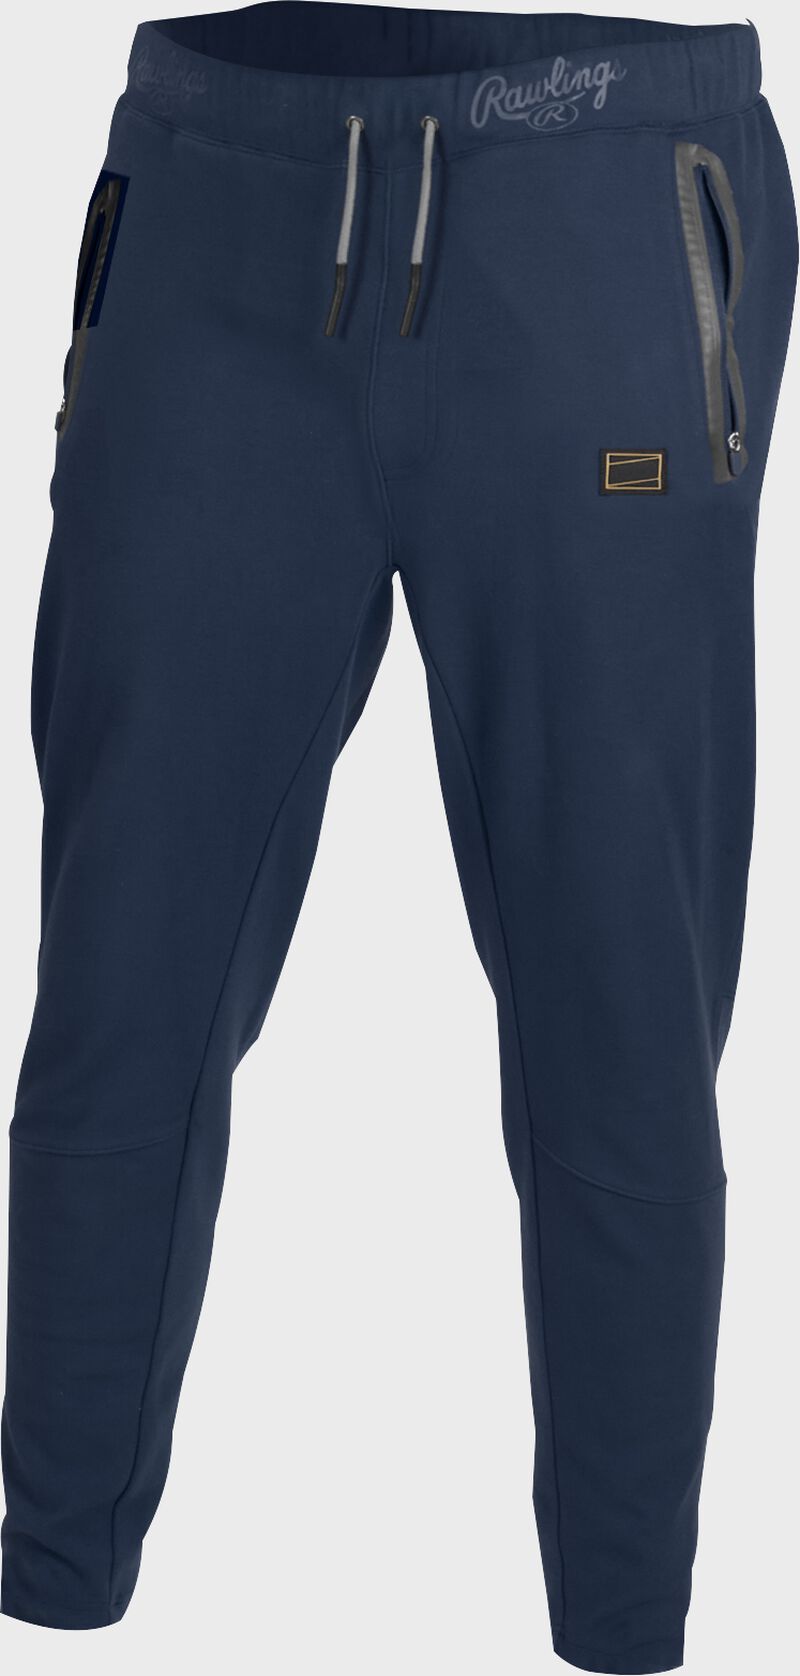 Navy Gold Collection jogger style pants with gray draw strings - SKU: GCJOG-N